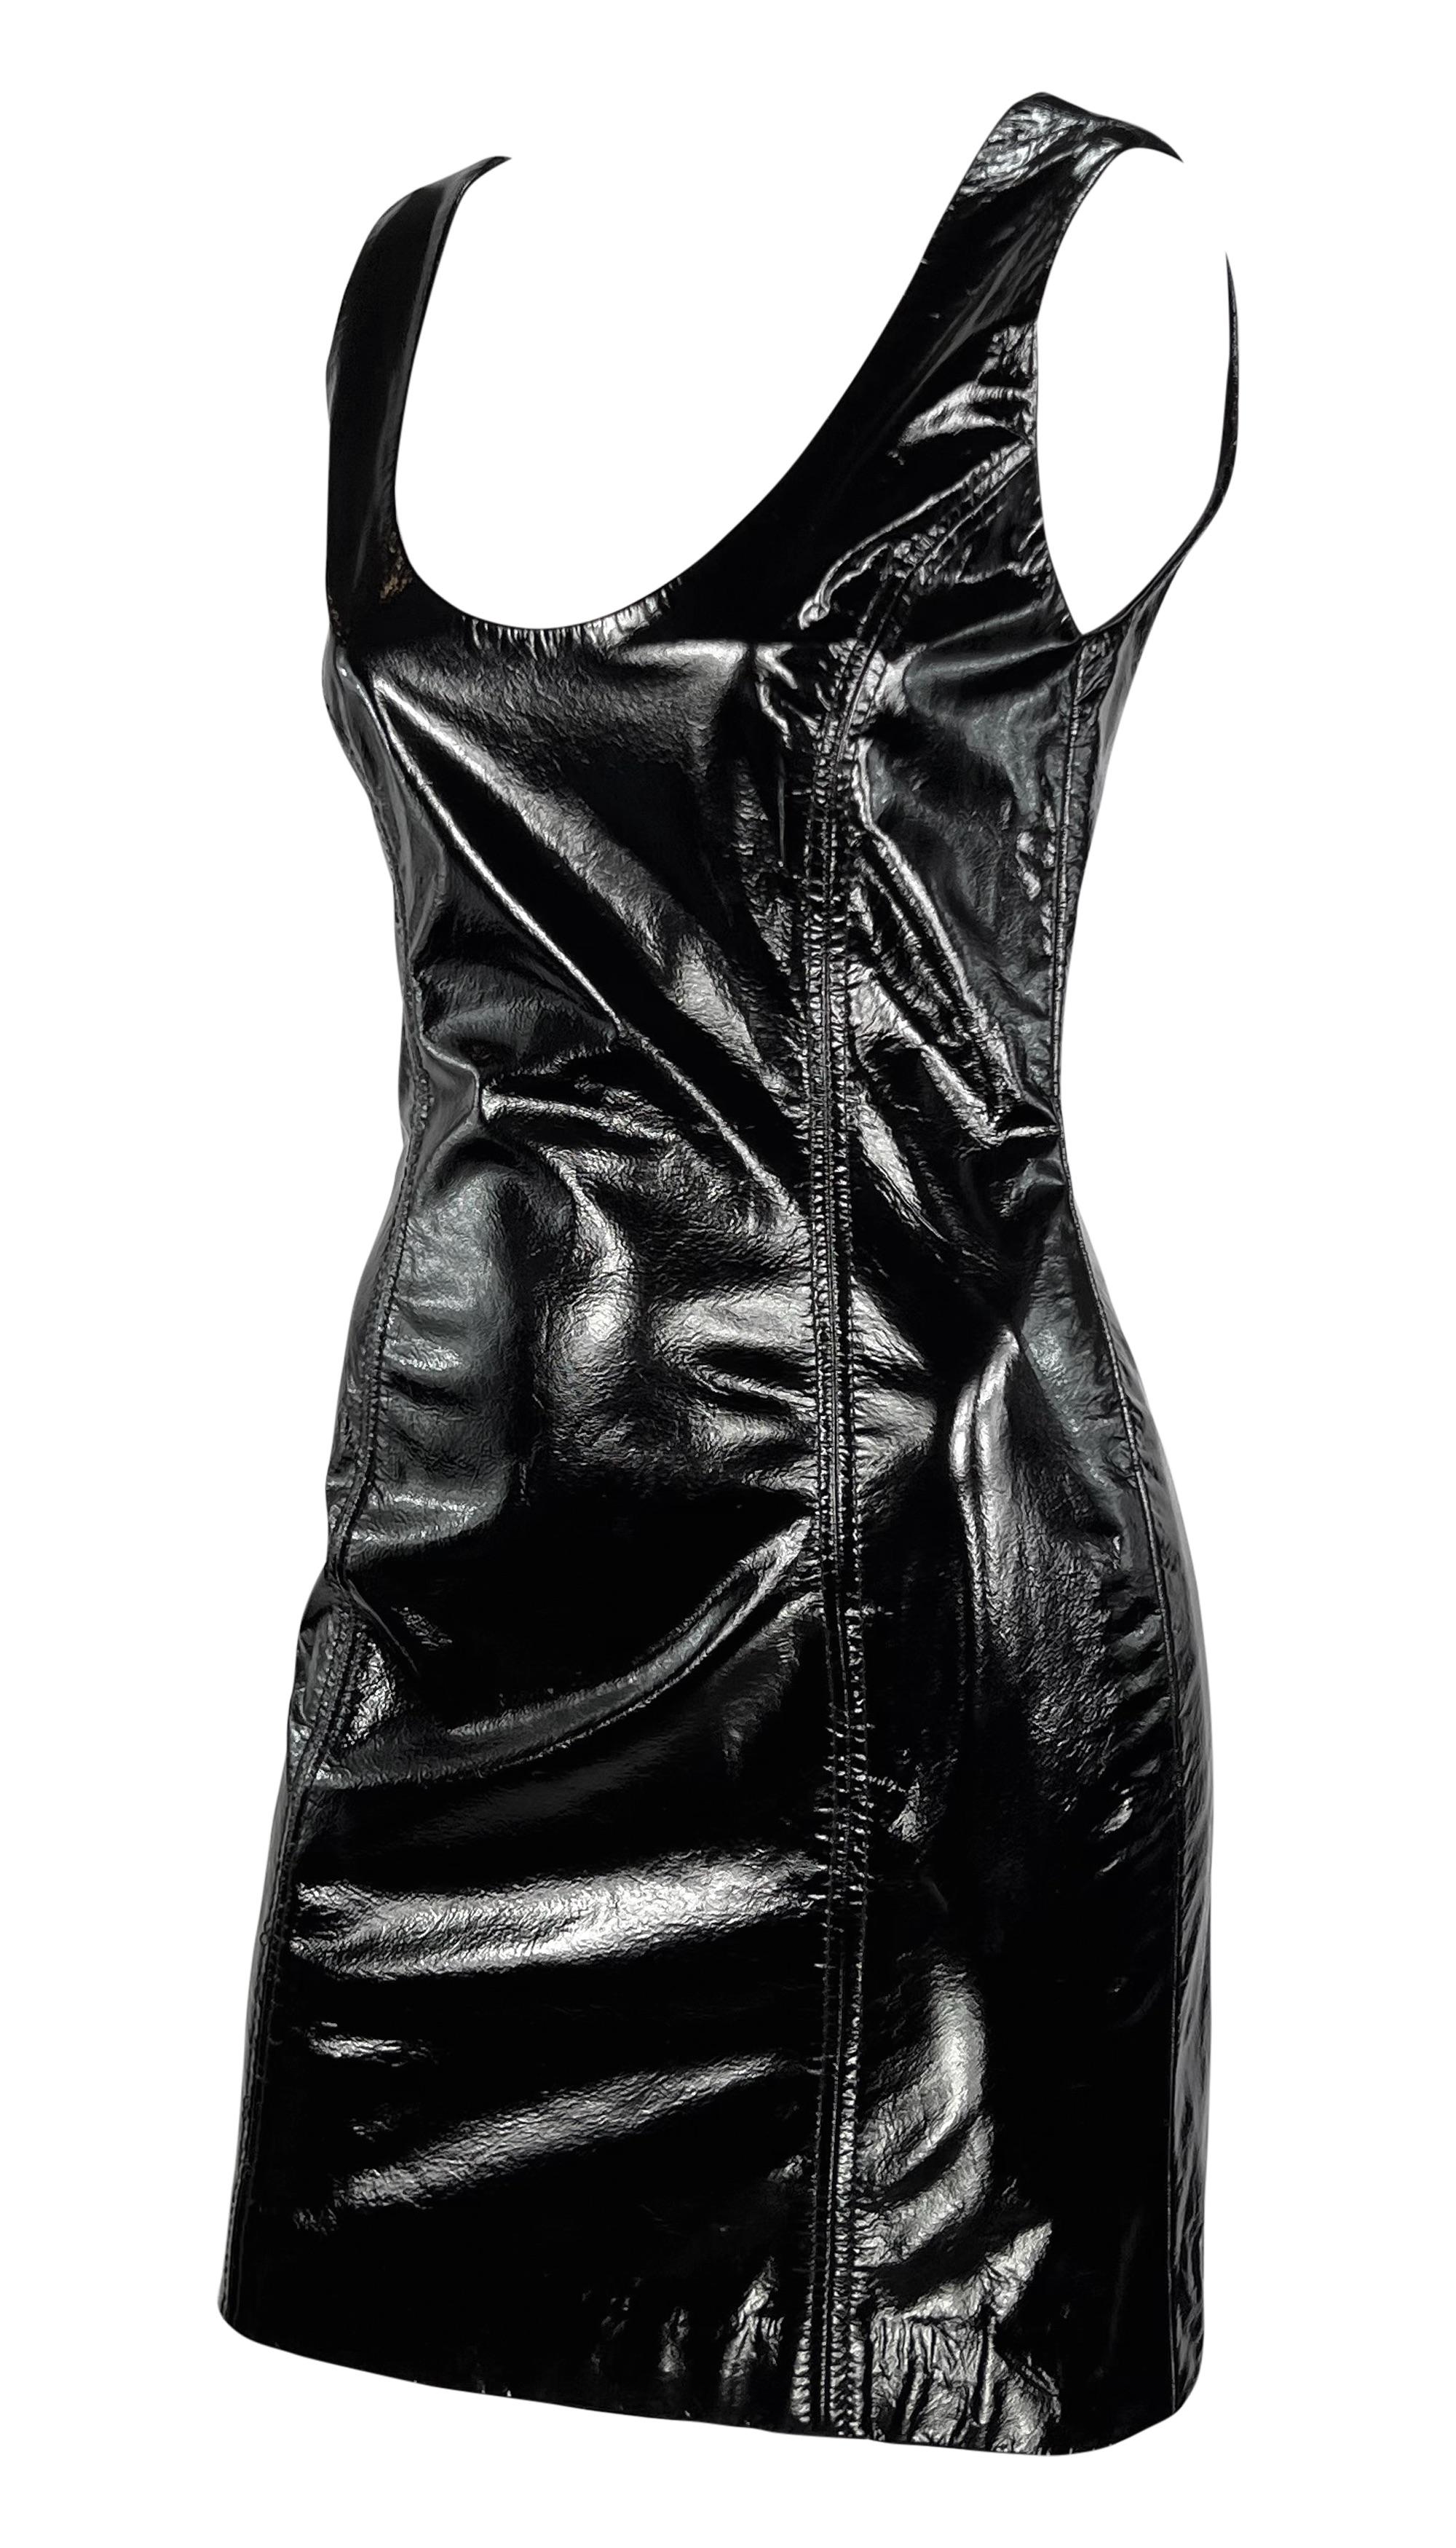 From the 1990s, this black patent leather Galanos mini dress is the perfect sexy LBD. Constructed entirely of black patent leather, this fitted mini dress features wide shoulder straps and a scoop necklace. 

Approximate measurements:
Size -